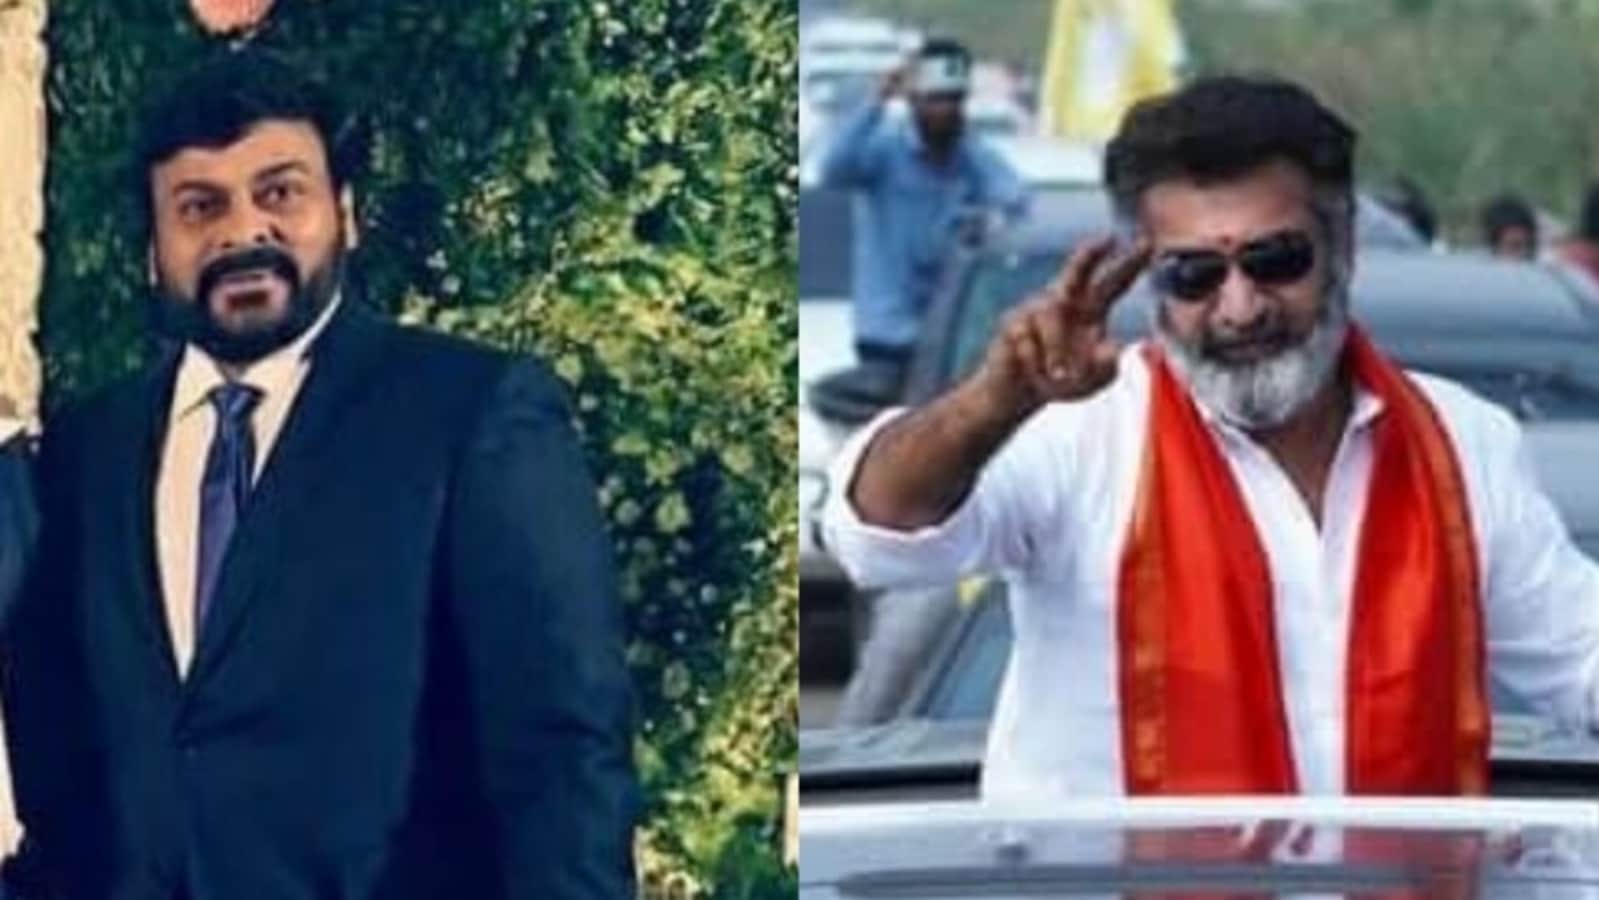 Chiranjeevi shares health update on Taraka Ratna, says he’s recovering: ‘Great relief to know there’s no further danger’